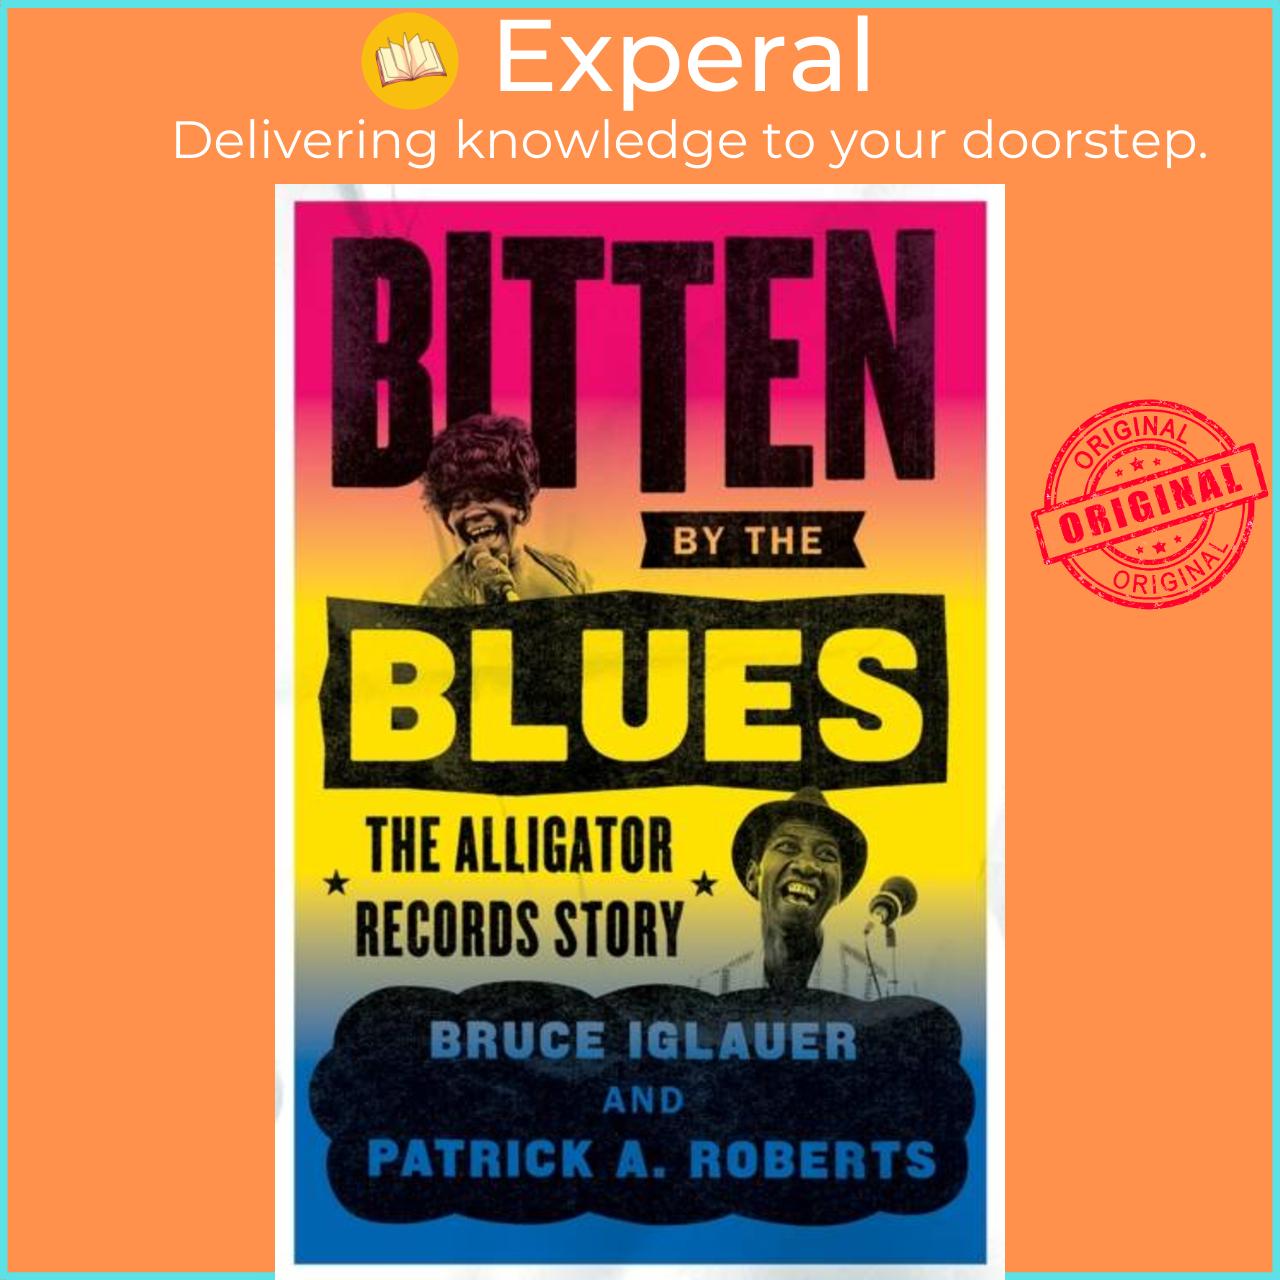 Sách - Bitten by the Blues - The Alligator Records Story by Patrick A Roberts (UK edition, paperback)